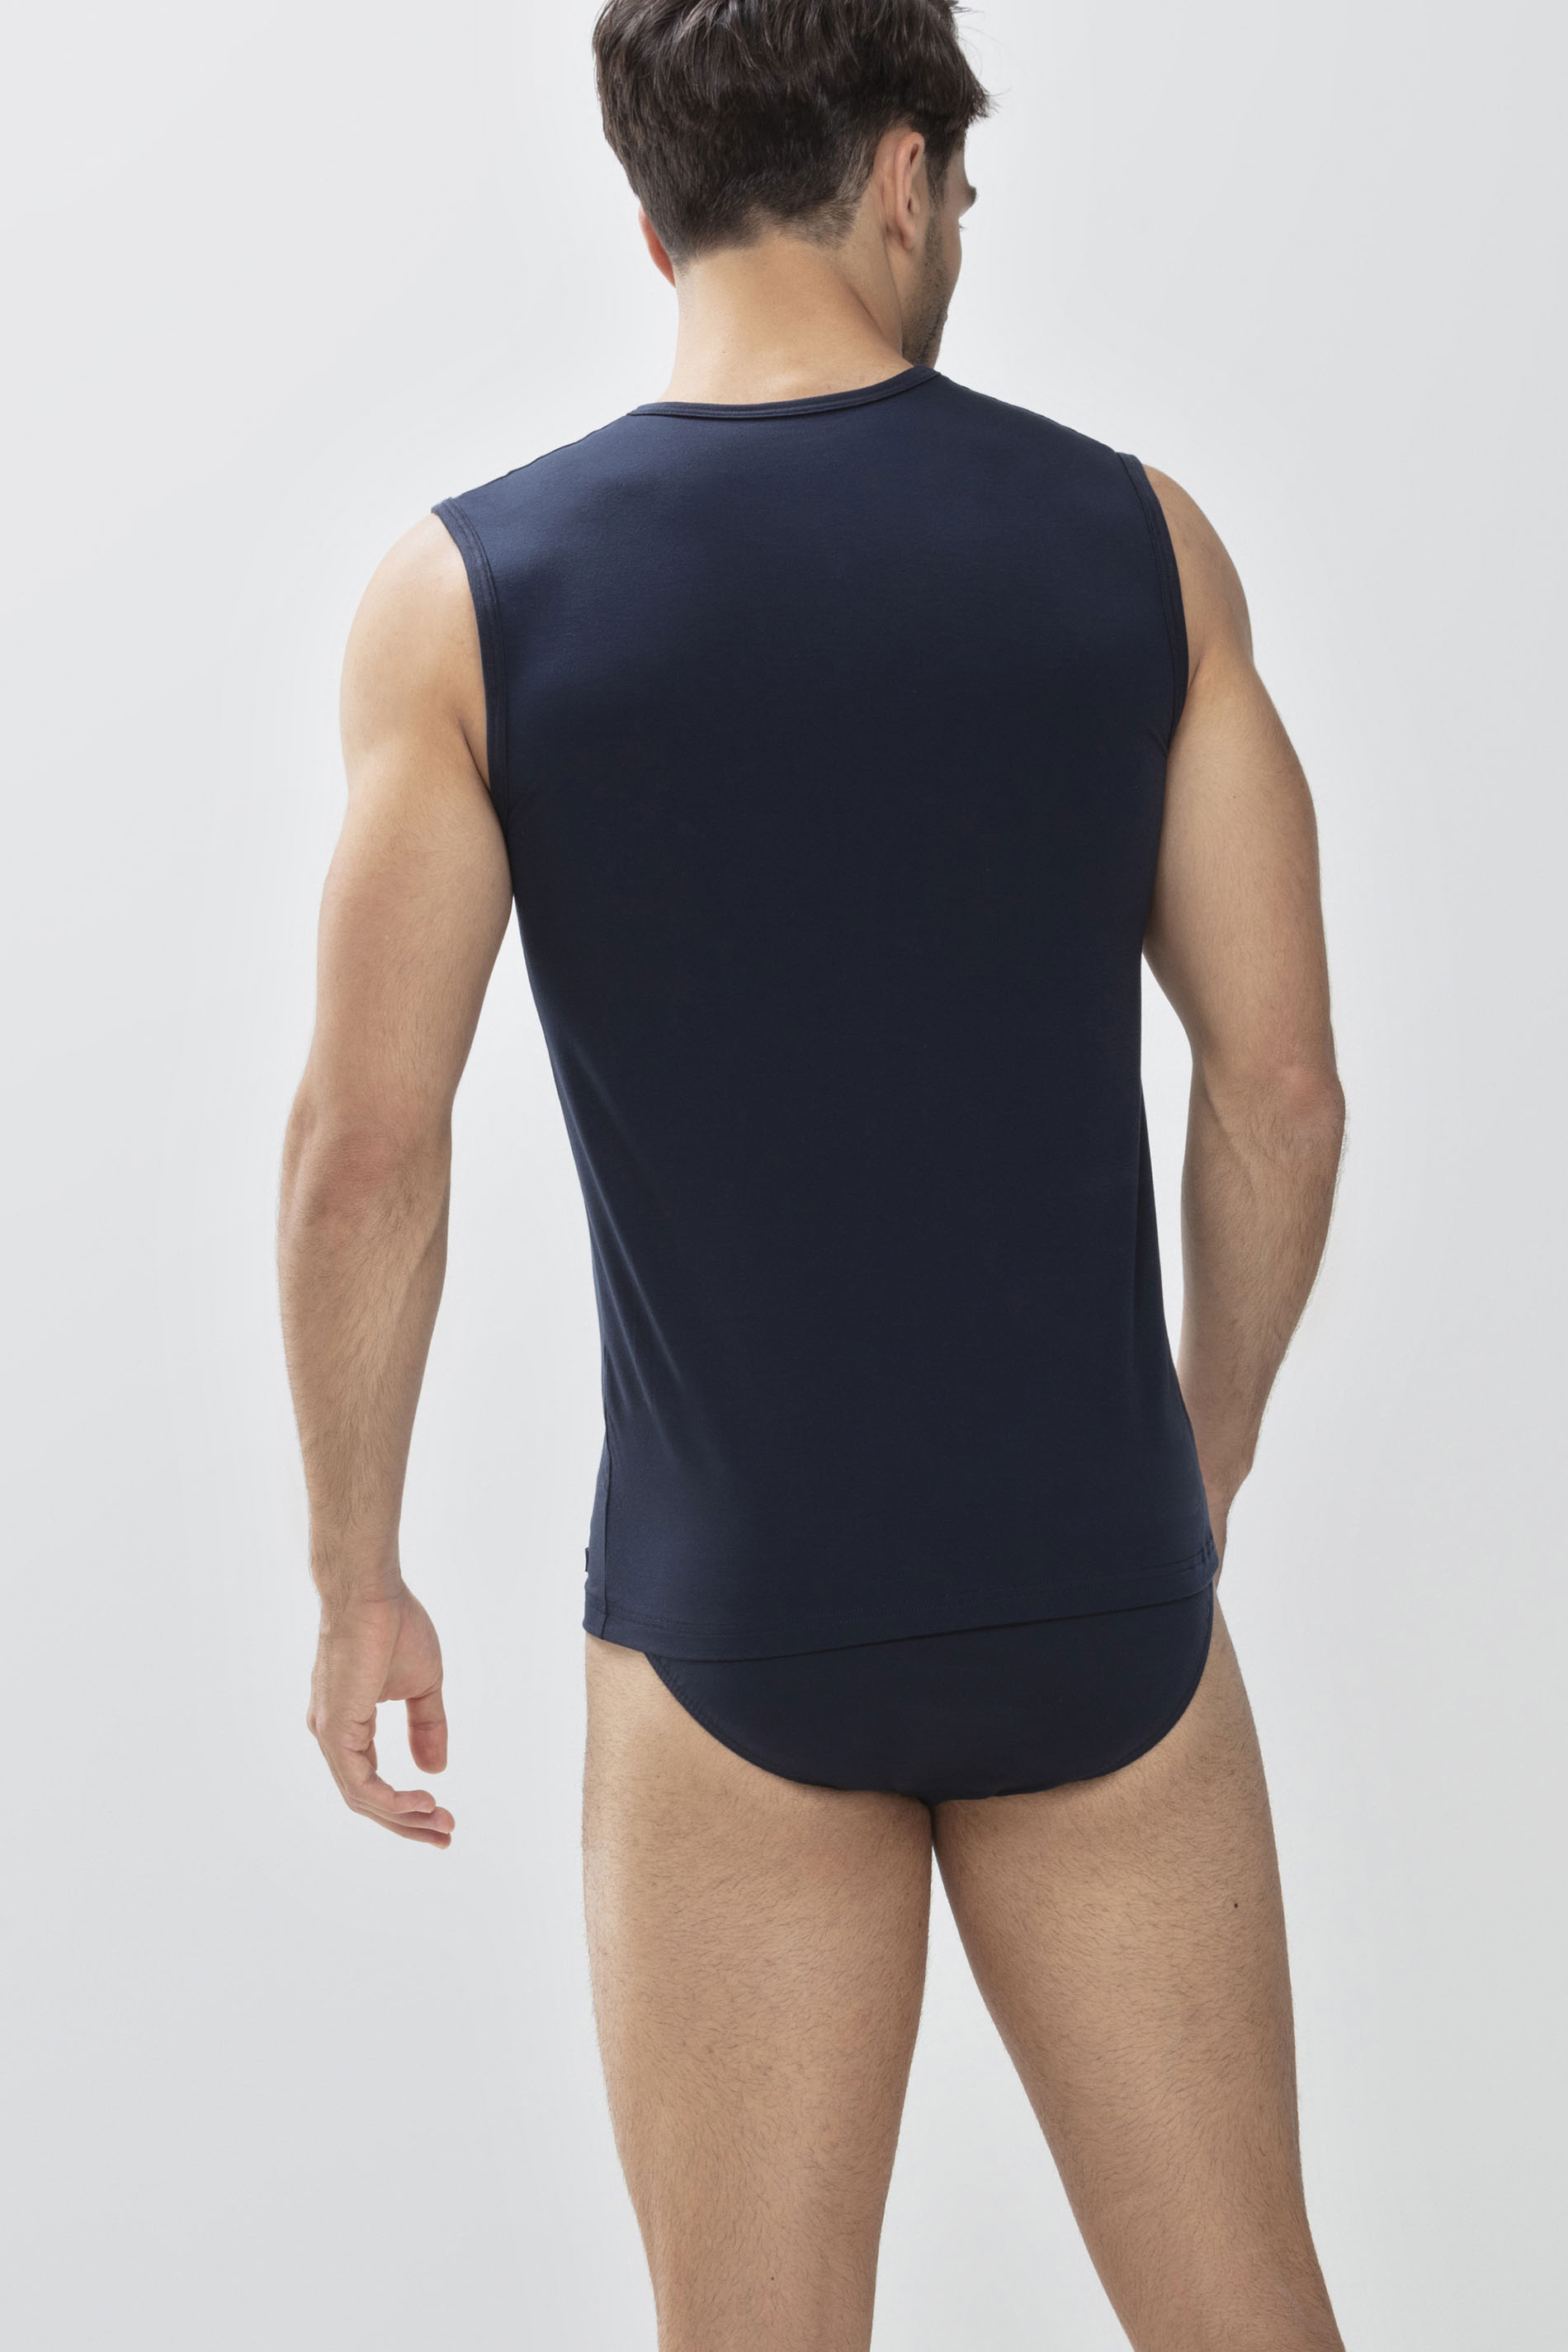 Muskel-Shirt Navy Serie Network Rear View | mey®